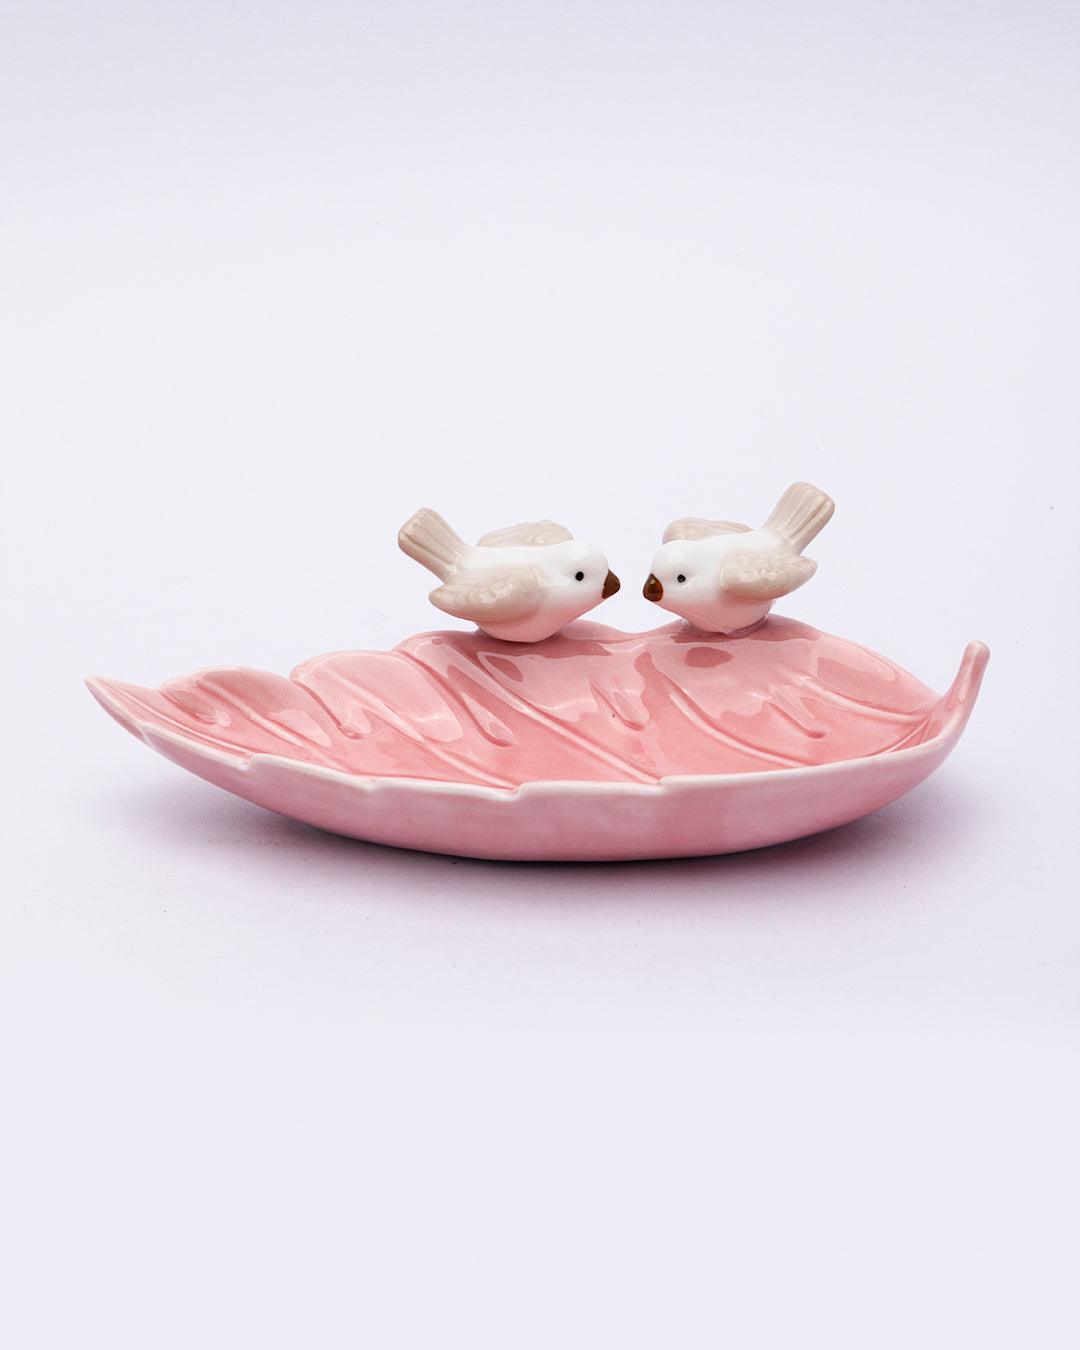 Jewellery Holder Tray, Crafted Bird, for Dressing Table, Ring Dash, Triangle, Pink, Ceramic - MARKET 99